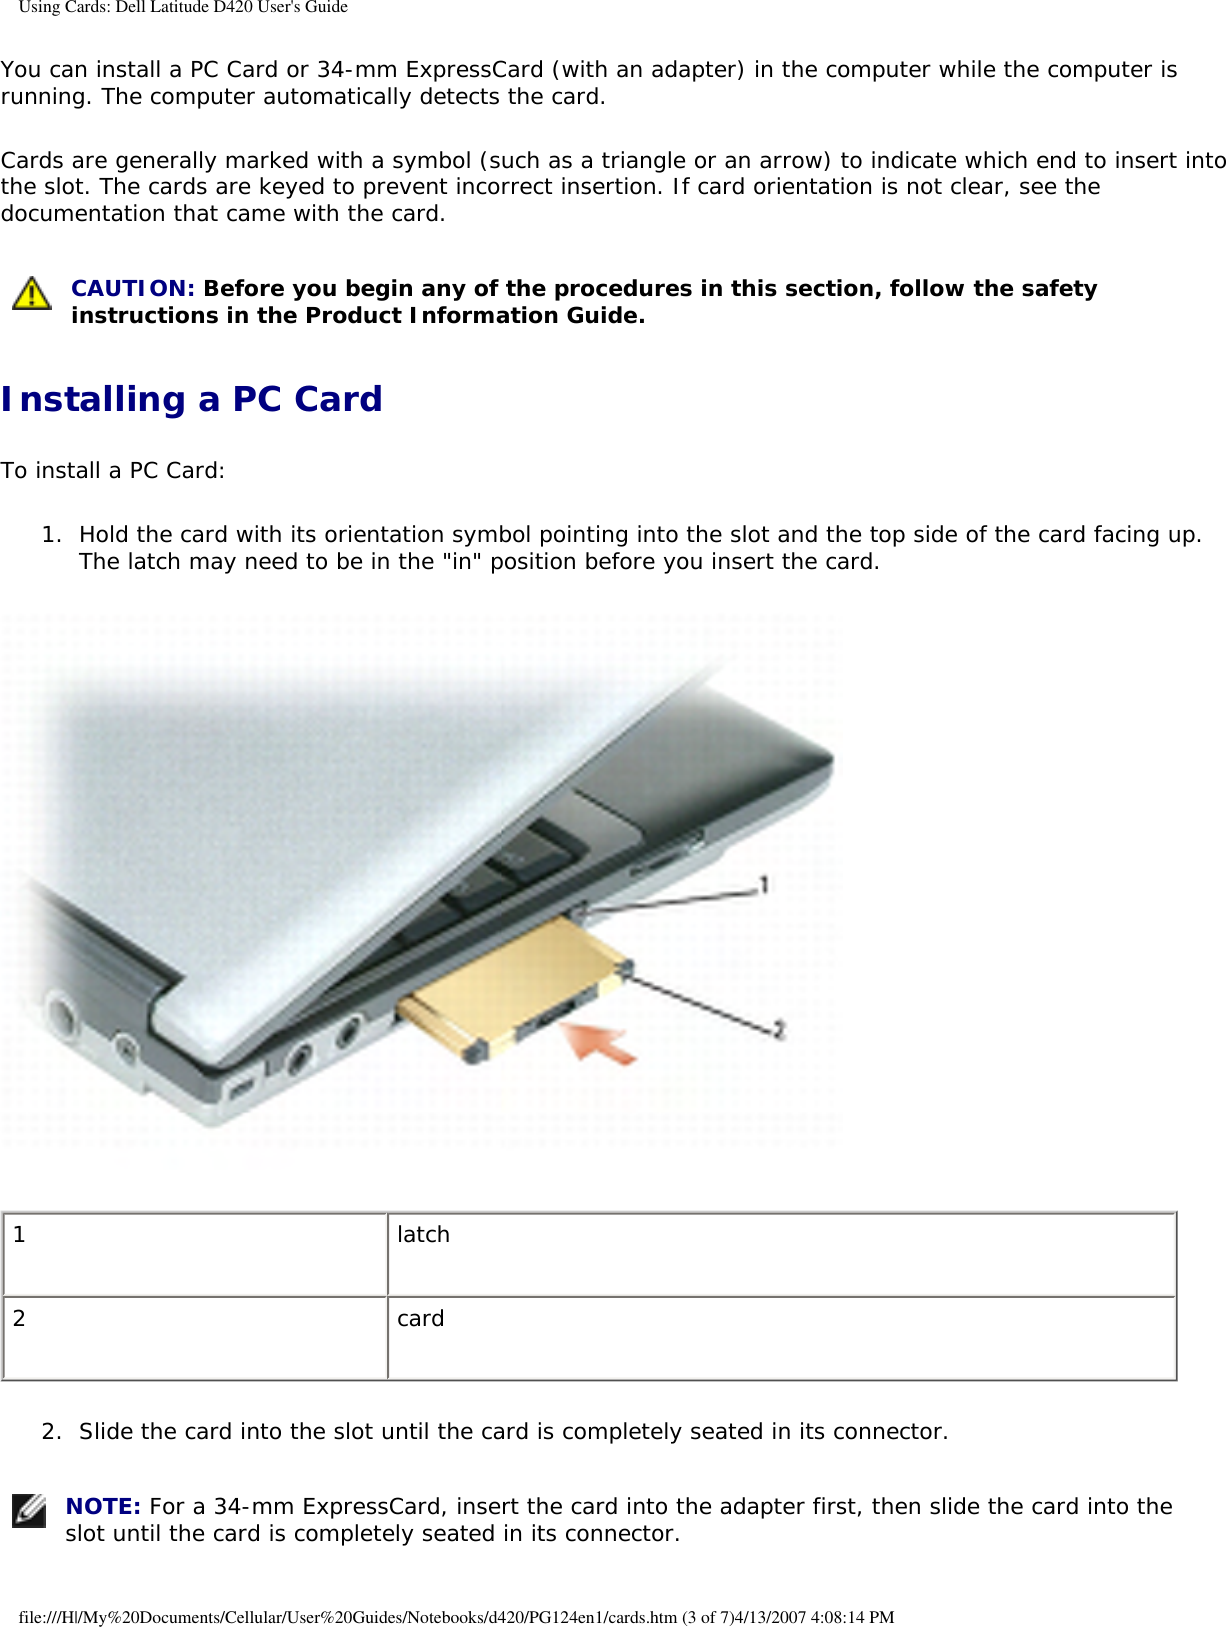 Using Cards: Dell Latitude D420 User&apos;s GuideYou can install a PC Card or 34-mm ExpressCard (with an adapter) in the computer while the computer is running. The computer automatically detects the card.Cards are generally marked with a symbol (such as a triangle or an arrow) to indicate which end to insert into the slot. The cards are keyed to prevent incorrect insertion. If card orientation is not clear, see the documentation that came with the card.  CAUTION: Before you begin any of the procedures in this section, follow the safety instructions in the Product Information Guide. Installing a PC CardTo install a PC Card:1.  Hold the card with its orientation symbol pointing into the slot and the top side of the card facing up. The latch may need to be in the &quot;in&quot; position before you insert the card.    1 latch2 card2.  Slide the card into the slot until the card is completely seated in its connector.    NOTE: For a 34-mm ExpressCard, insert the card into the adapter first, then slide the card into the slot until the card is completely seated in its connector. file:///H|/My%20Documents/Cellular/User%20Guides/Notebooks/d420/PG124en1/cards.htm (3 of 7)4/13/2007 4:08:14 PM